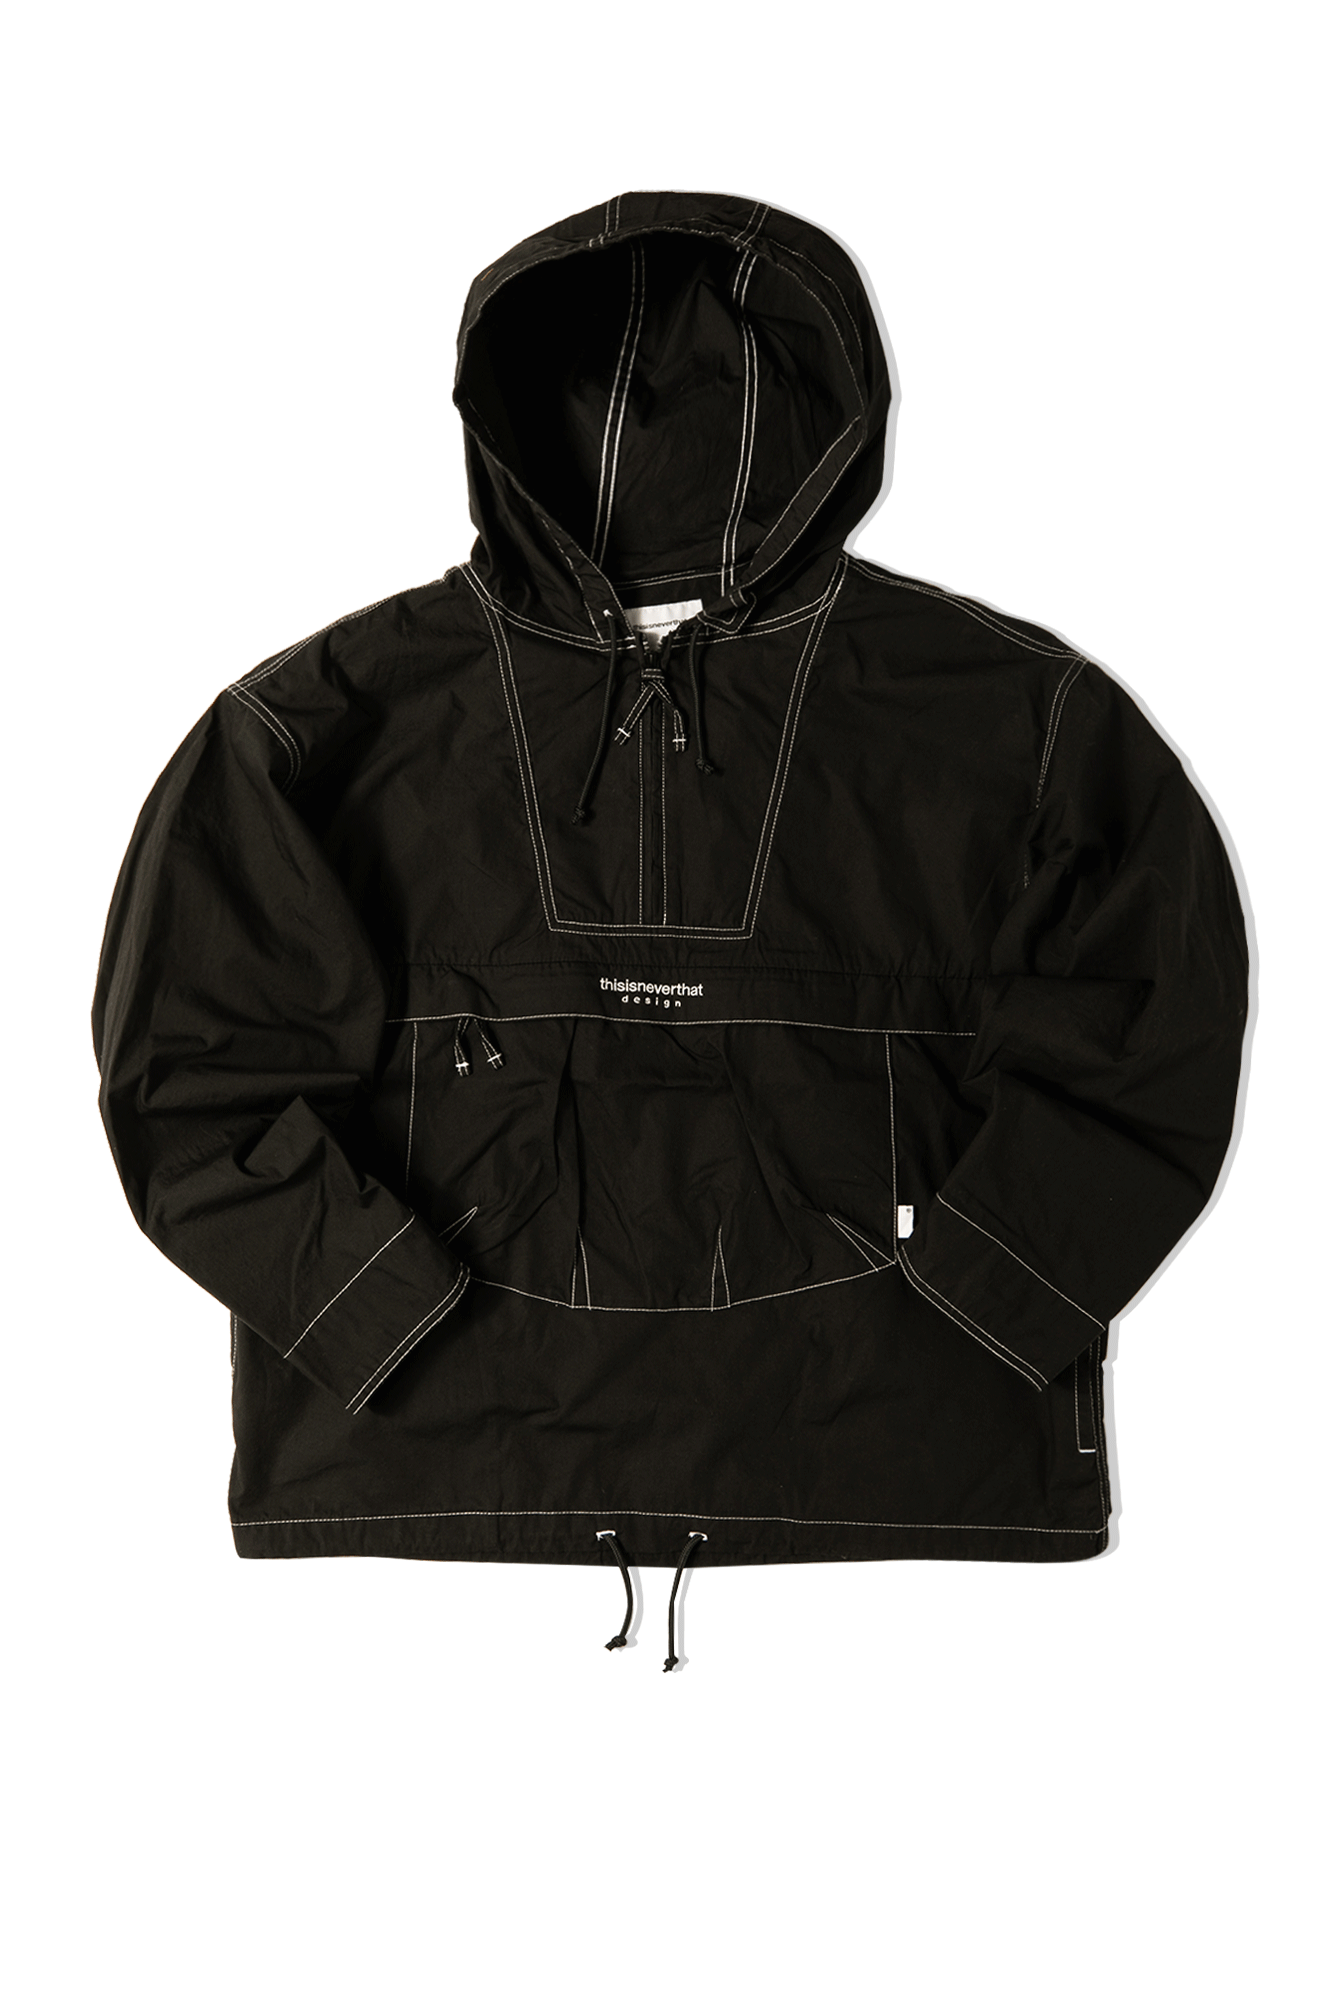 WALL* - Black supreme south2 west8 spring collaboration outerwear